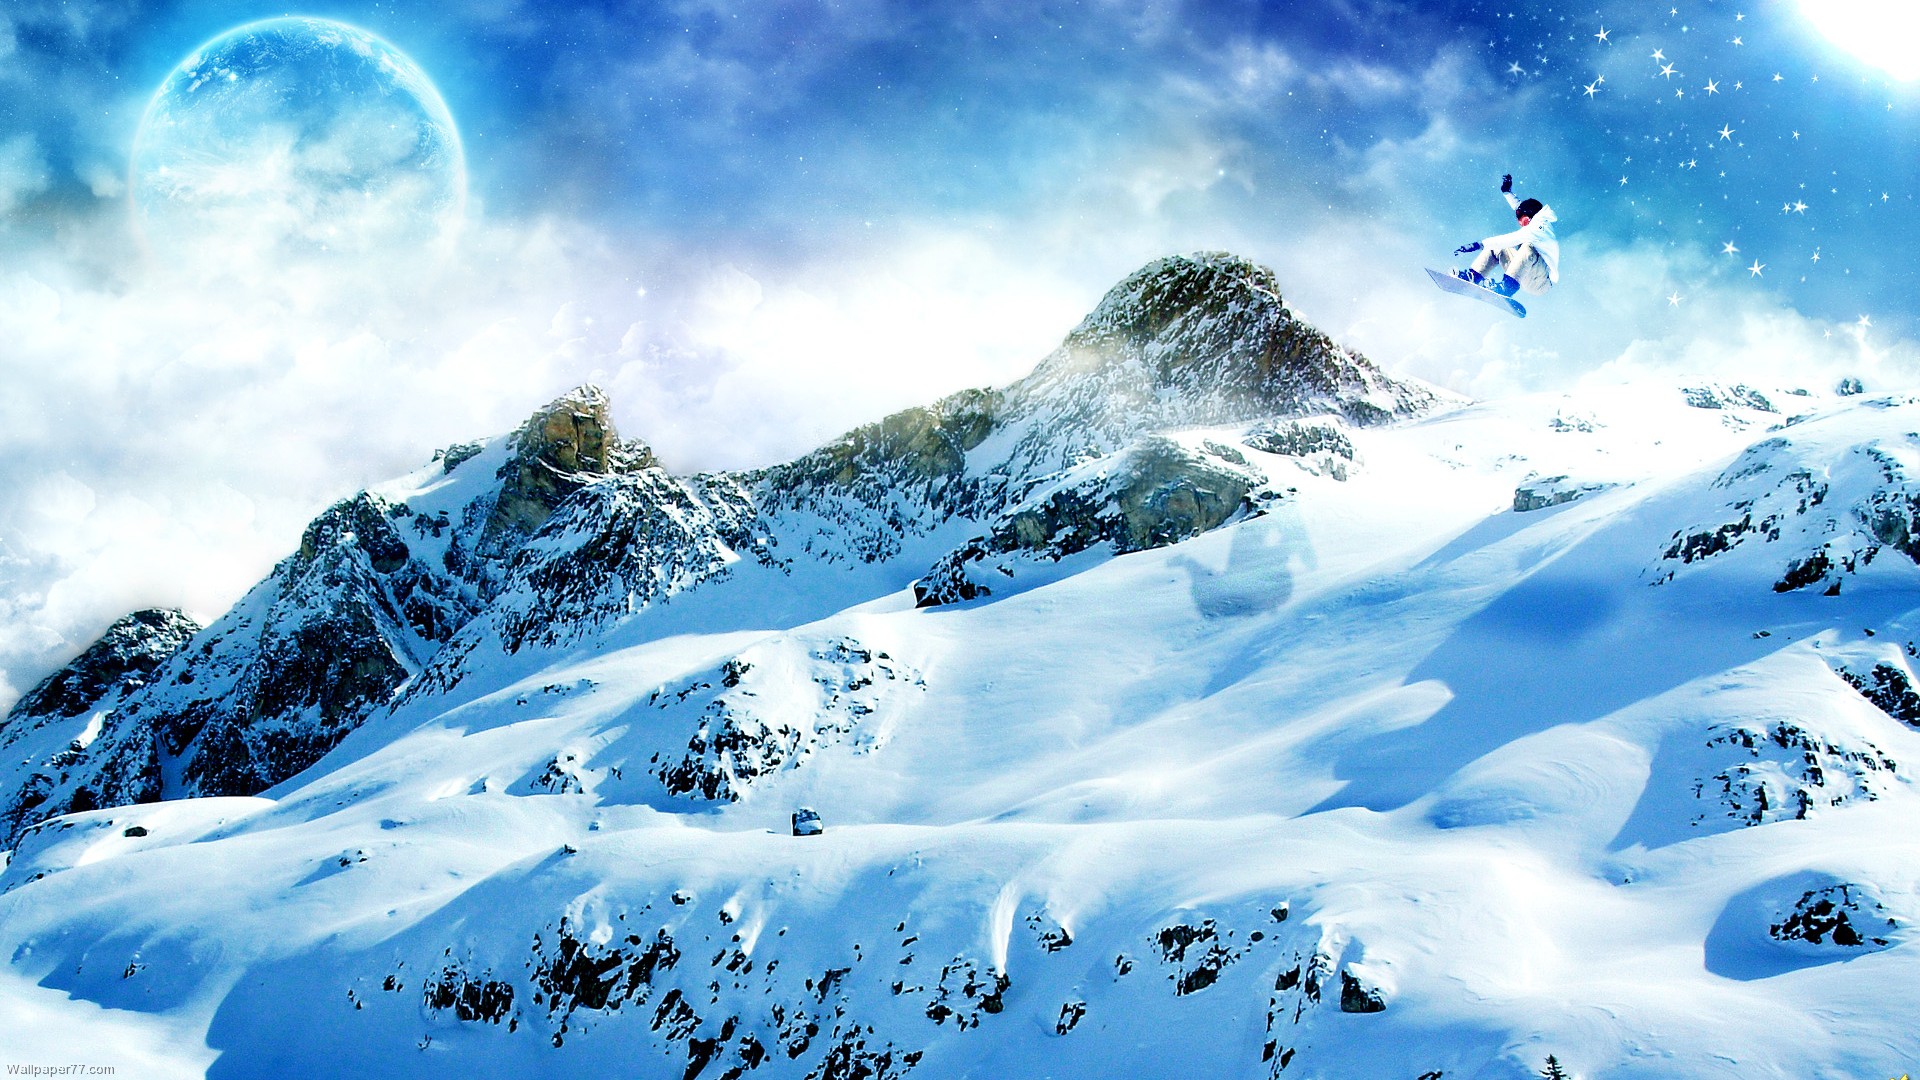 Snowboarding Wallpapers 47 images inside